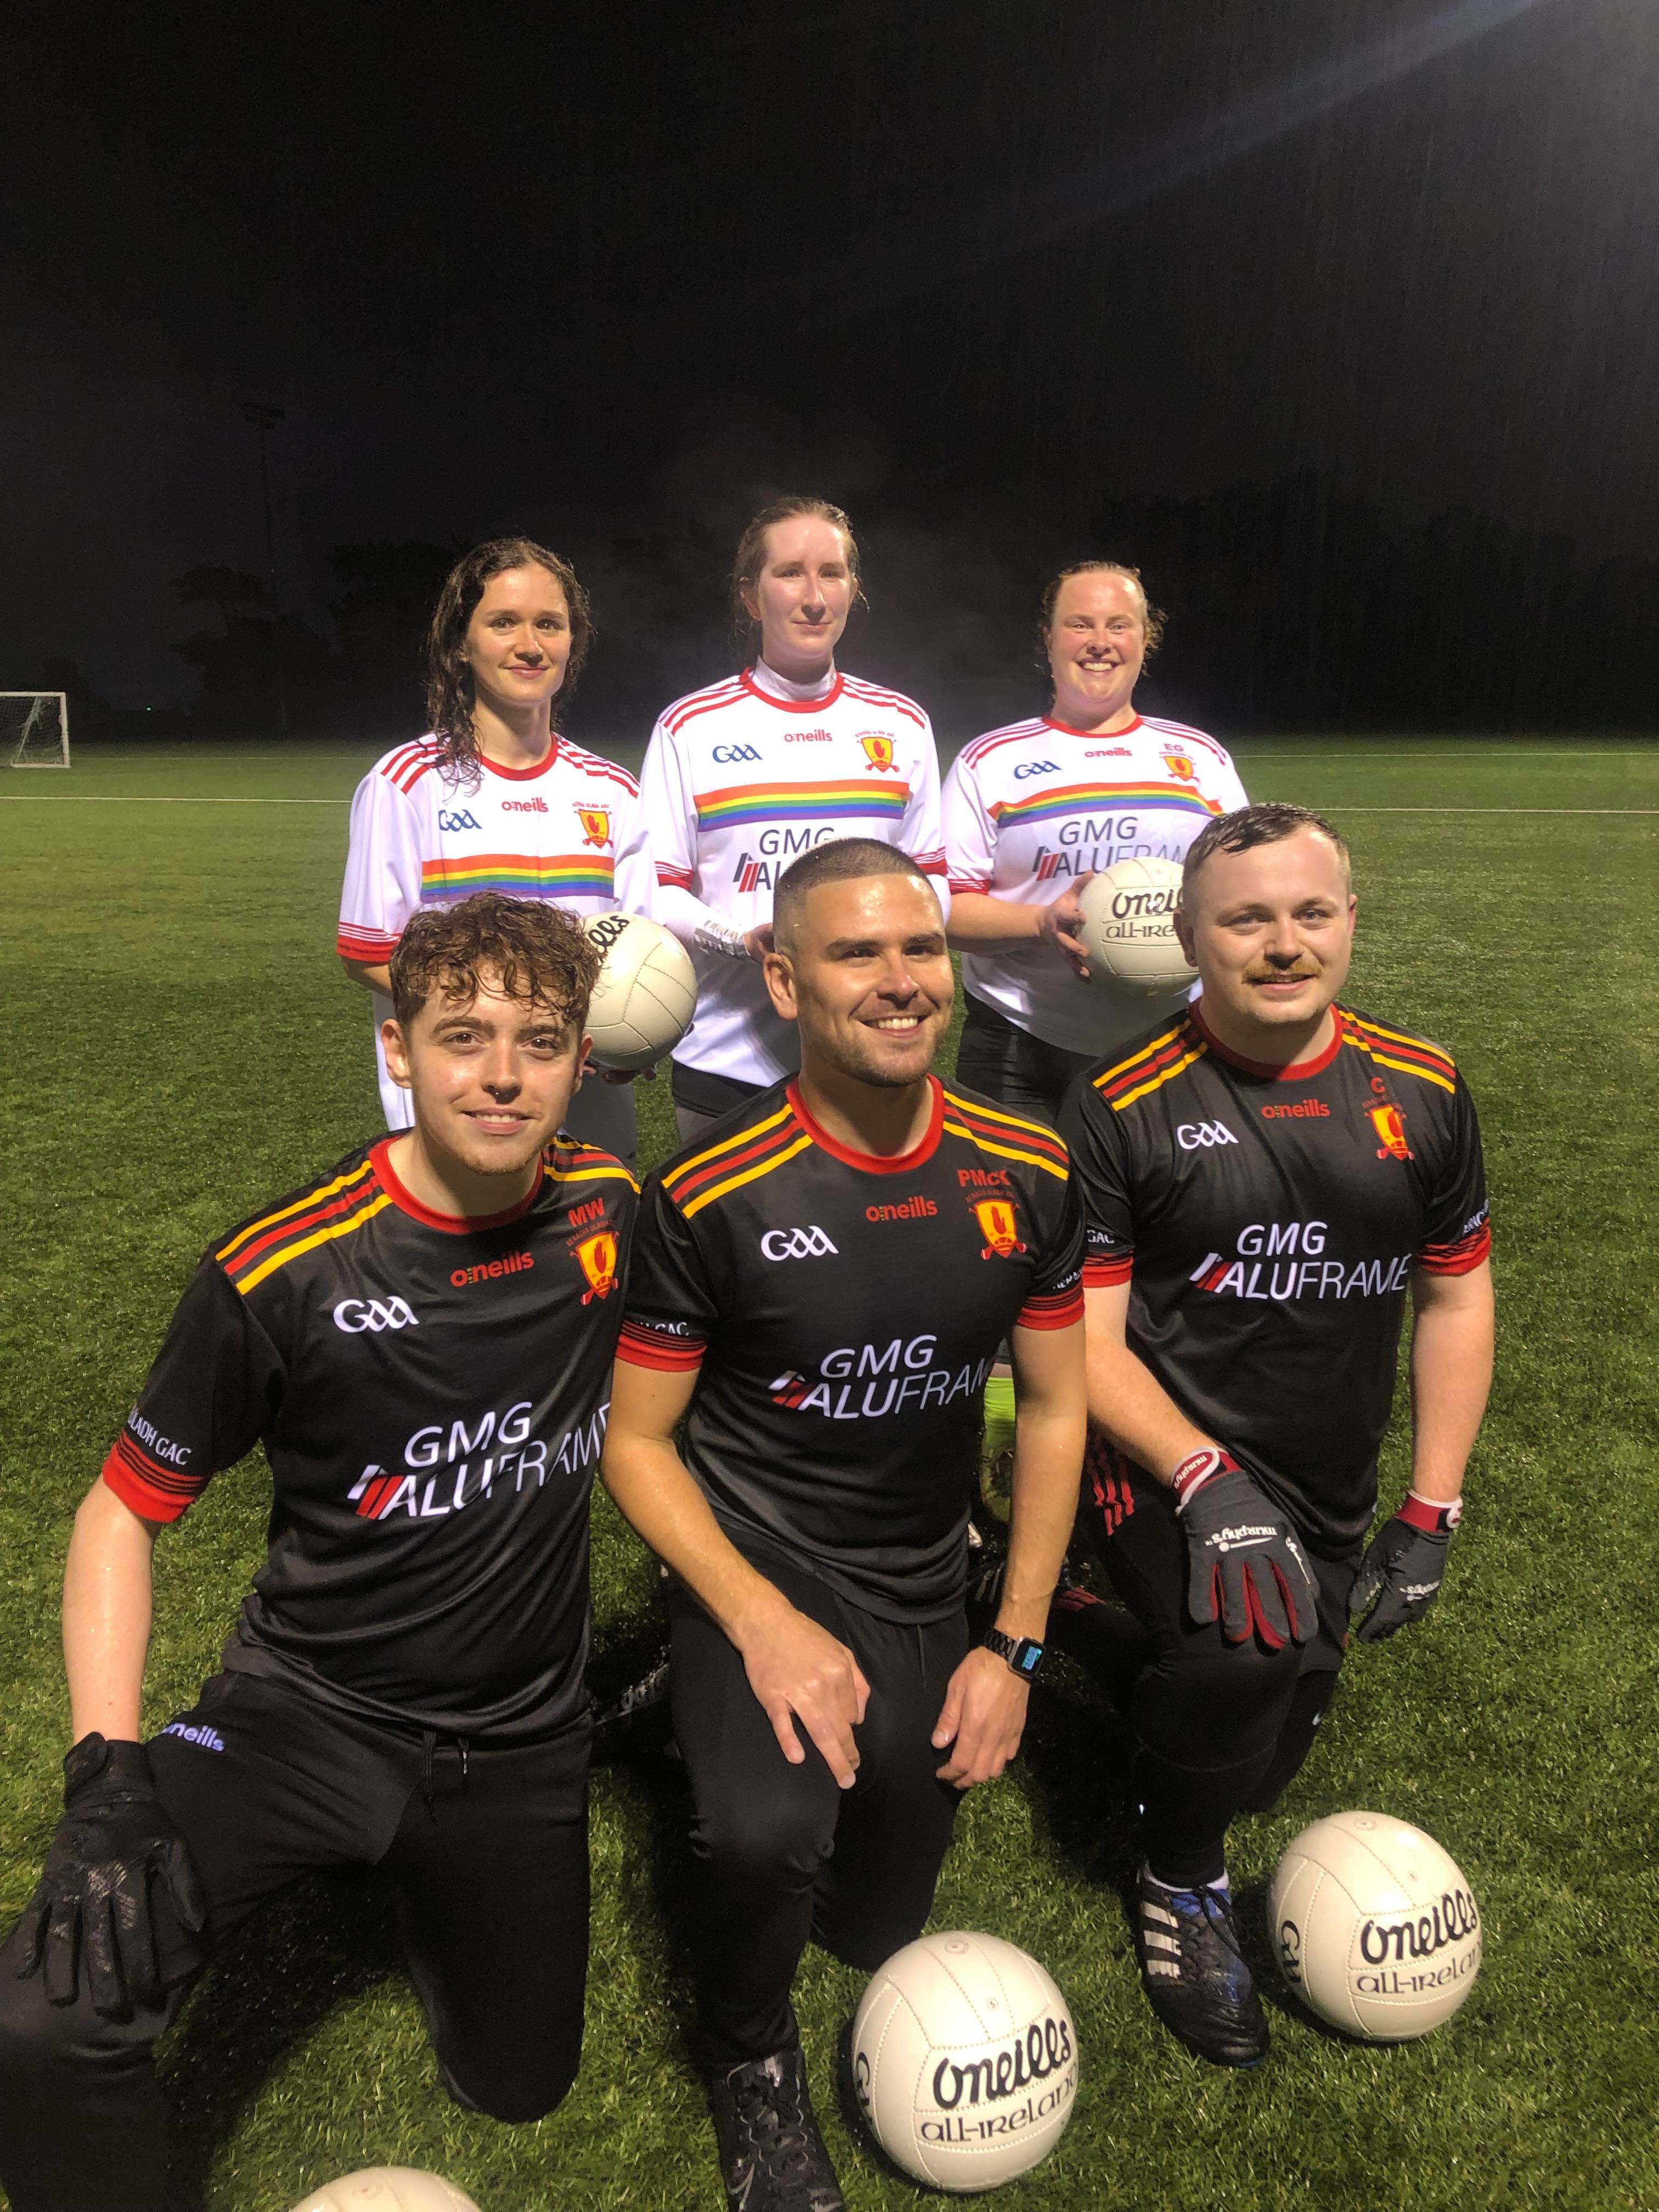 INCLUSIVE: Aeracha Uladh in their new kits which launched during Pride